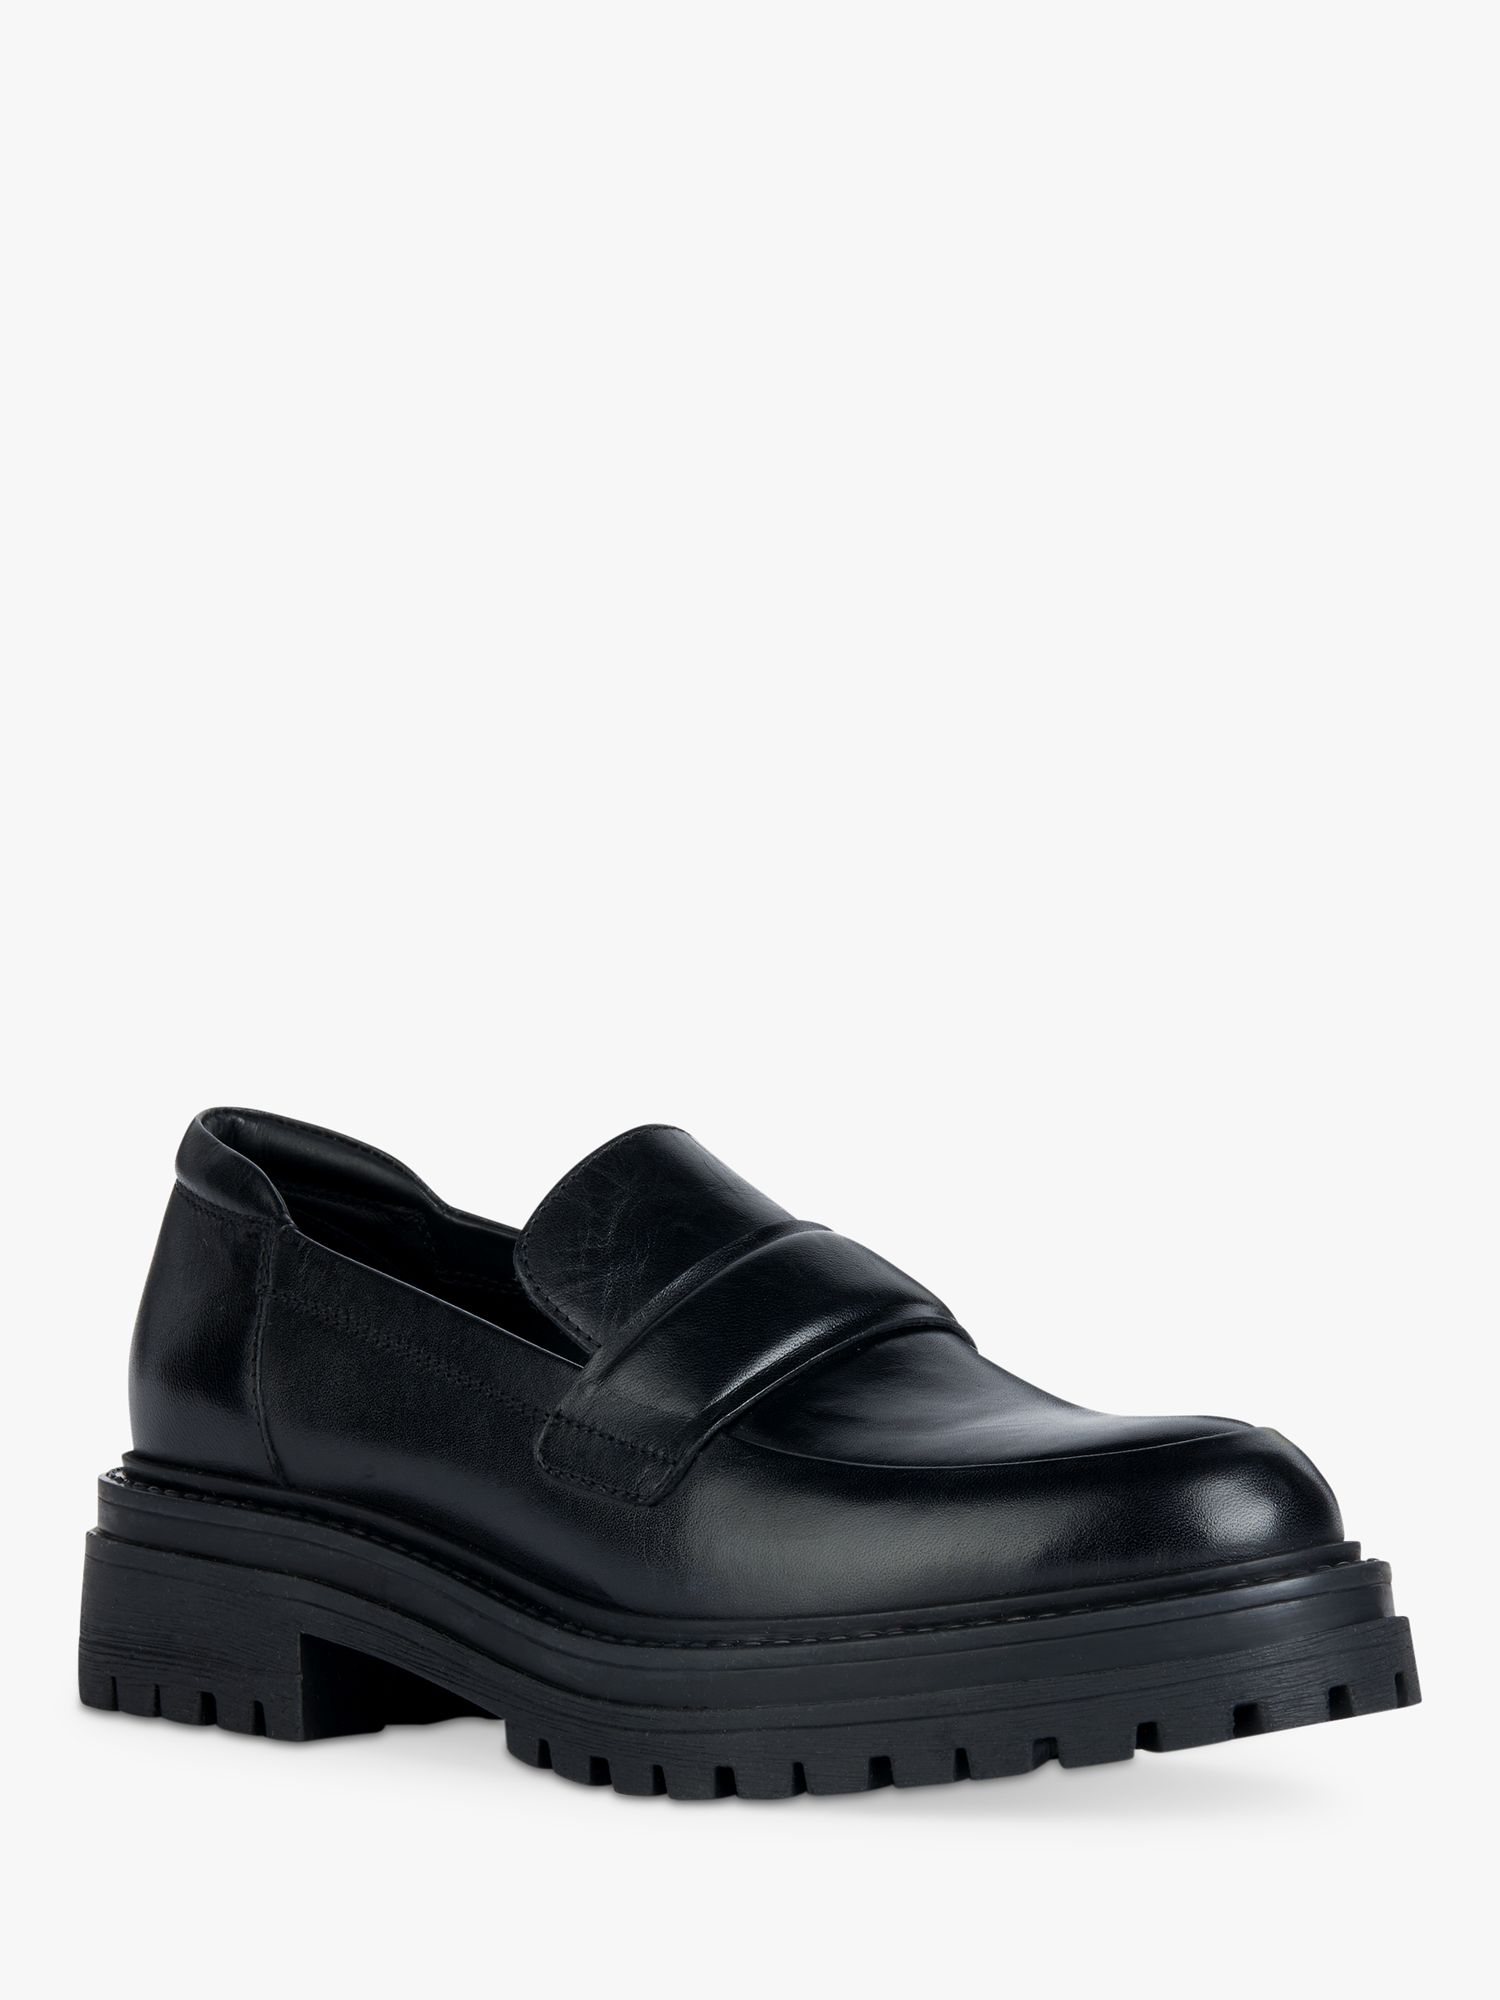 Geox Iridea Leather Loafers, Black at John Lewis & Partners